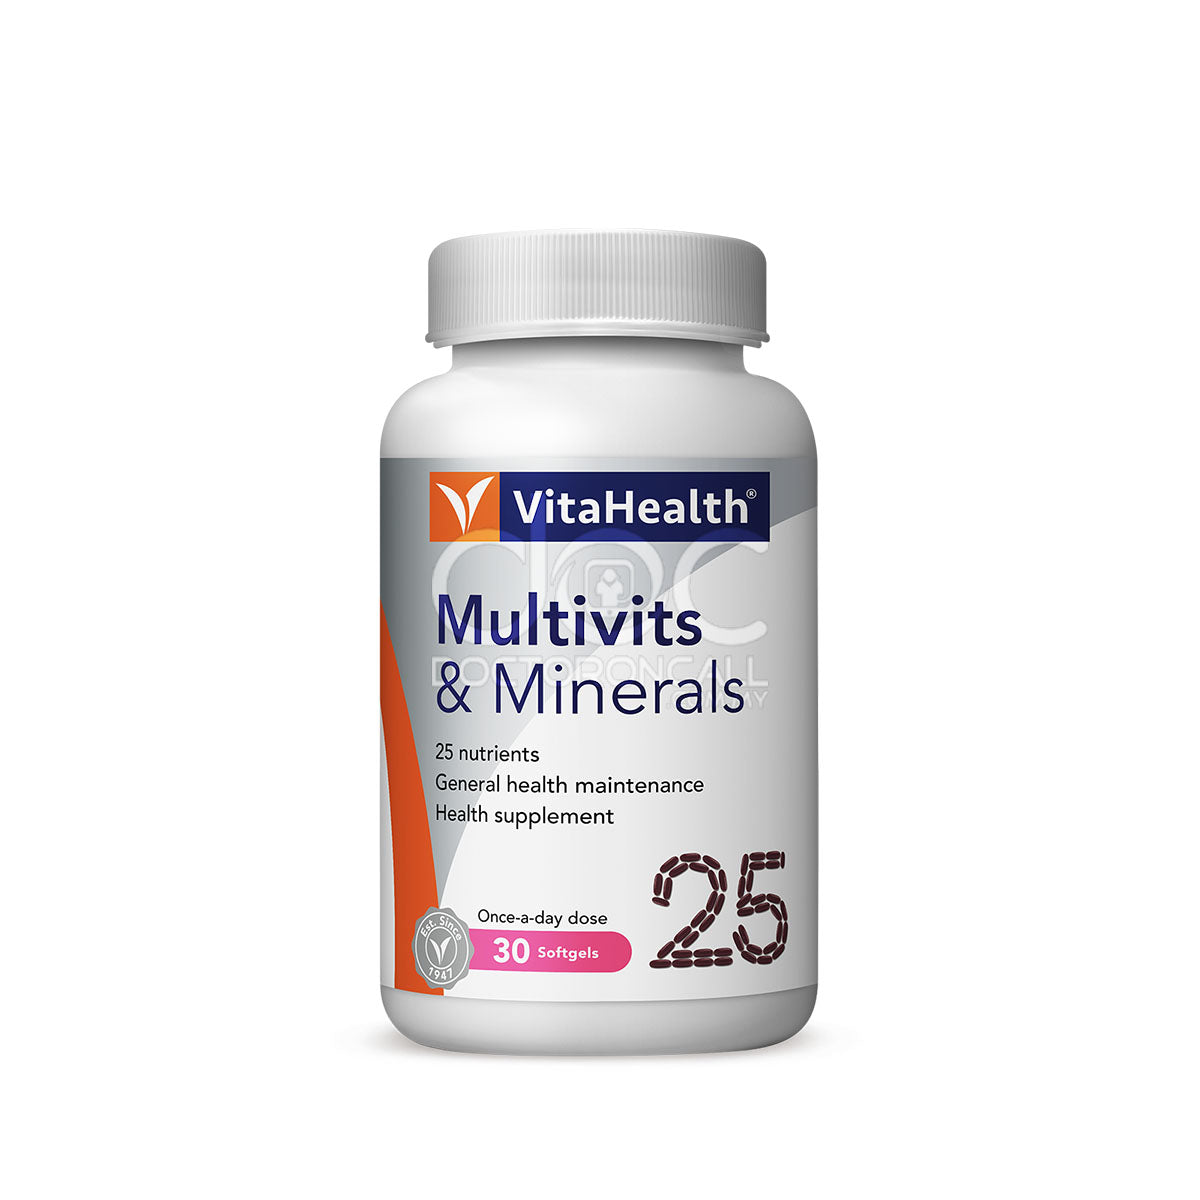 VitaHealth Multivitamins and Minerals Capsule 30s - DoctorOnCall Online Pharmacy